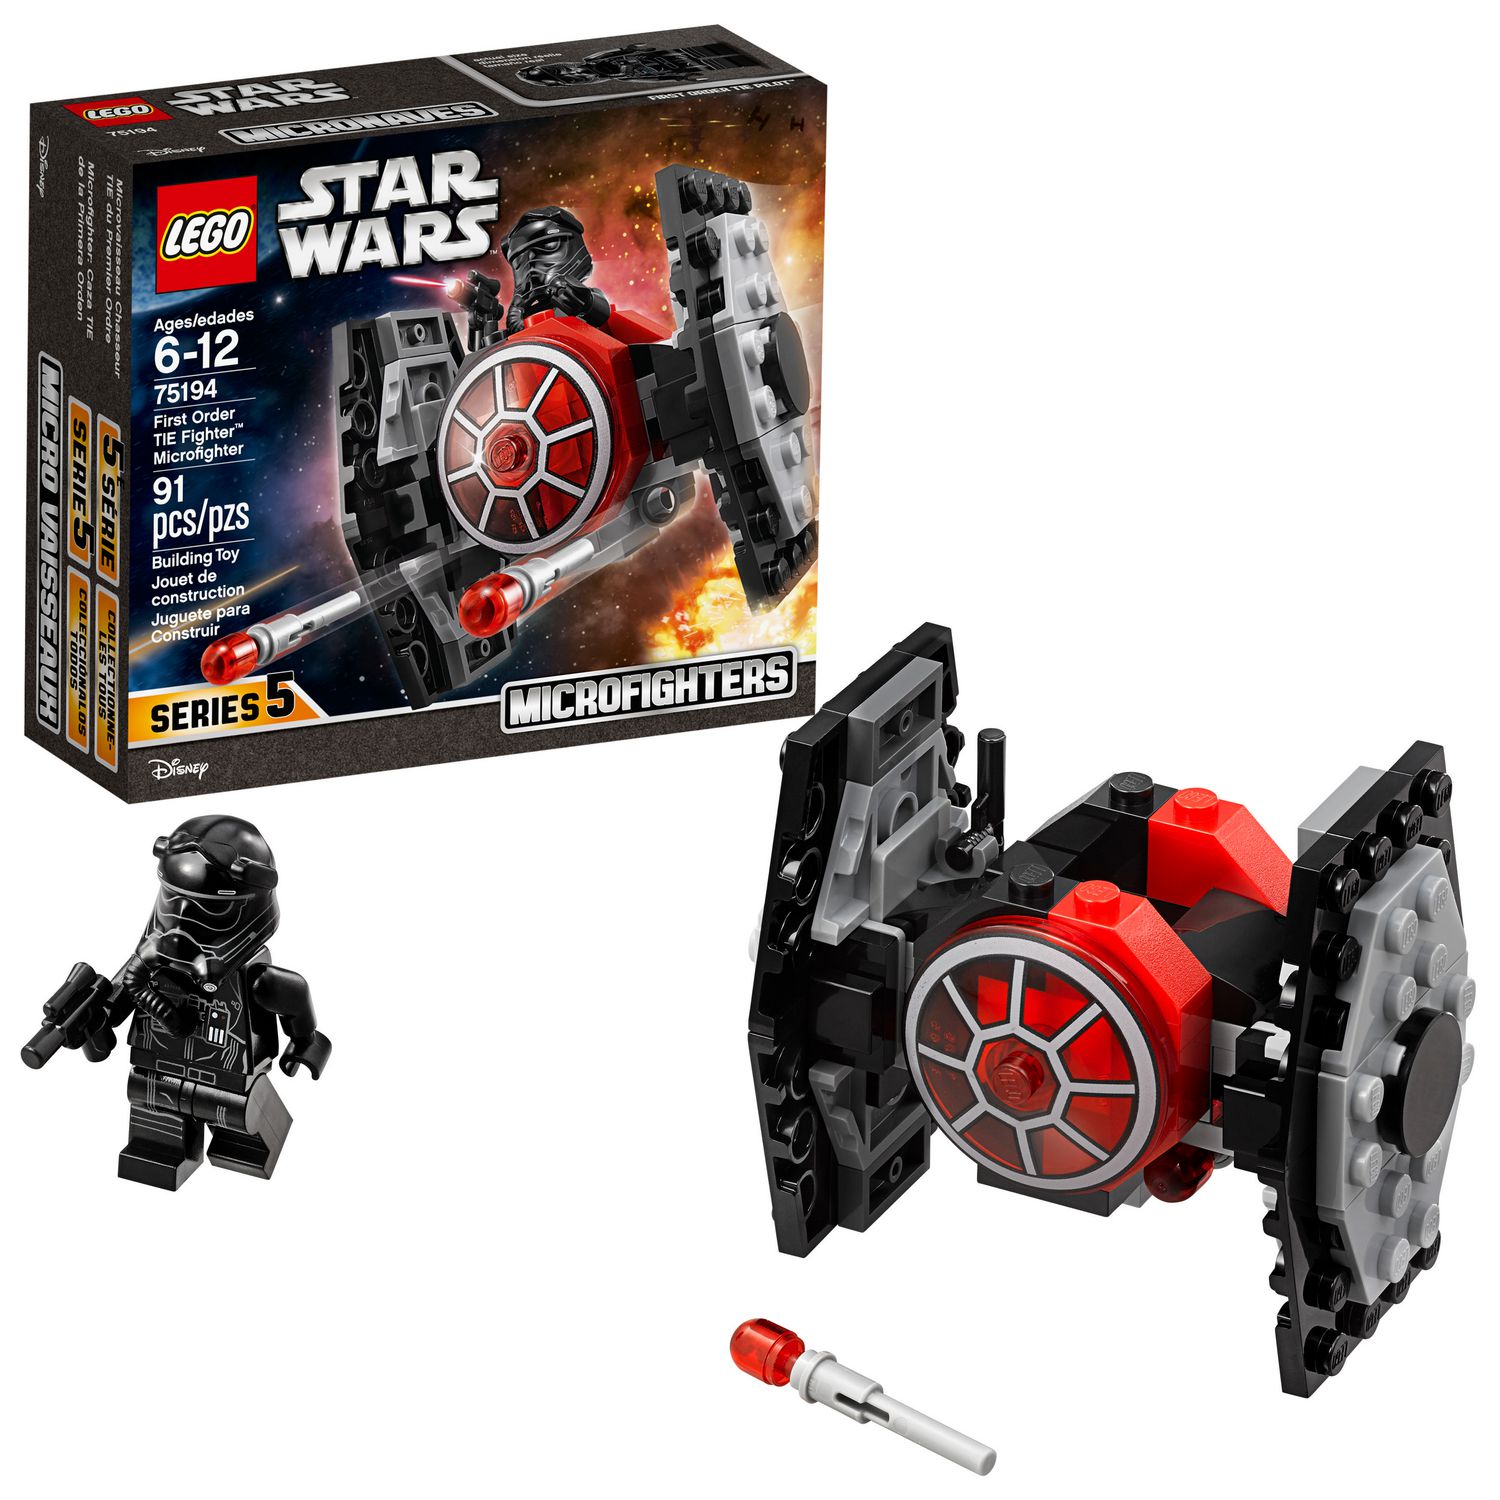 LEGO Star Wars: The Force Awakens First Order TIE Fighter